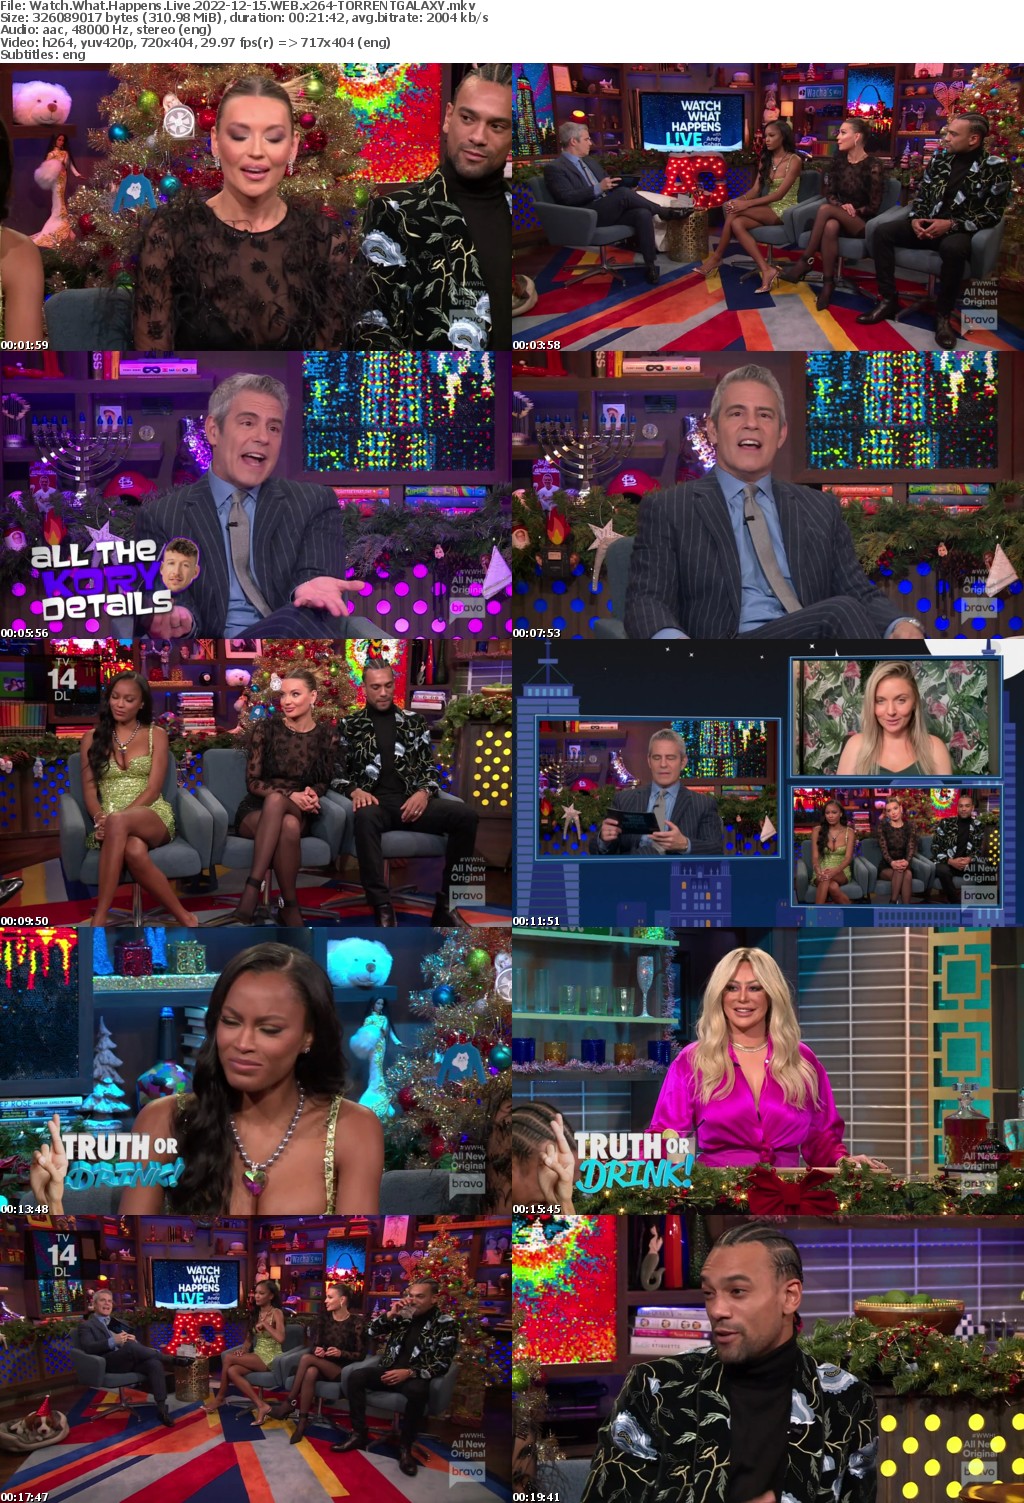 Watch What Happens Live 2022-12-15 WEB x264-GALAXY